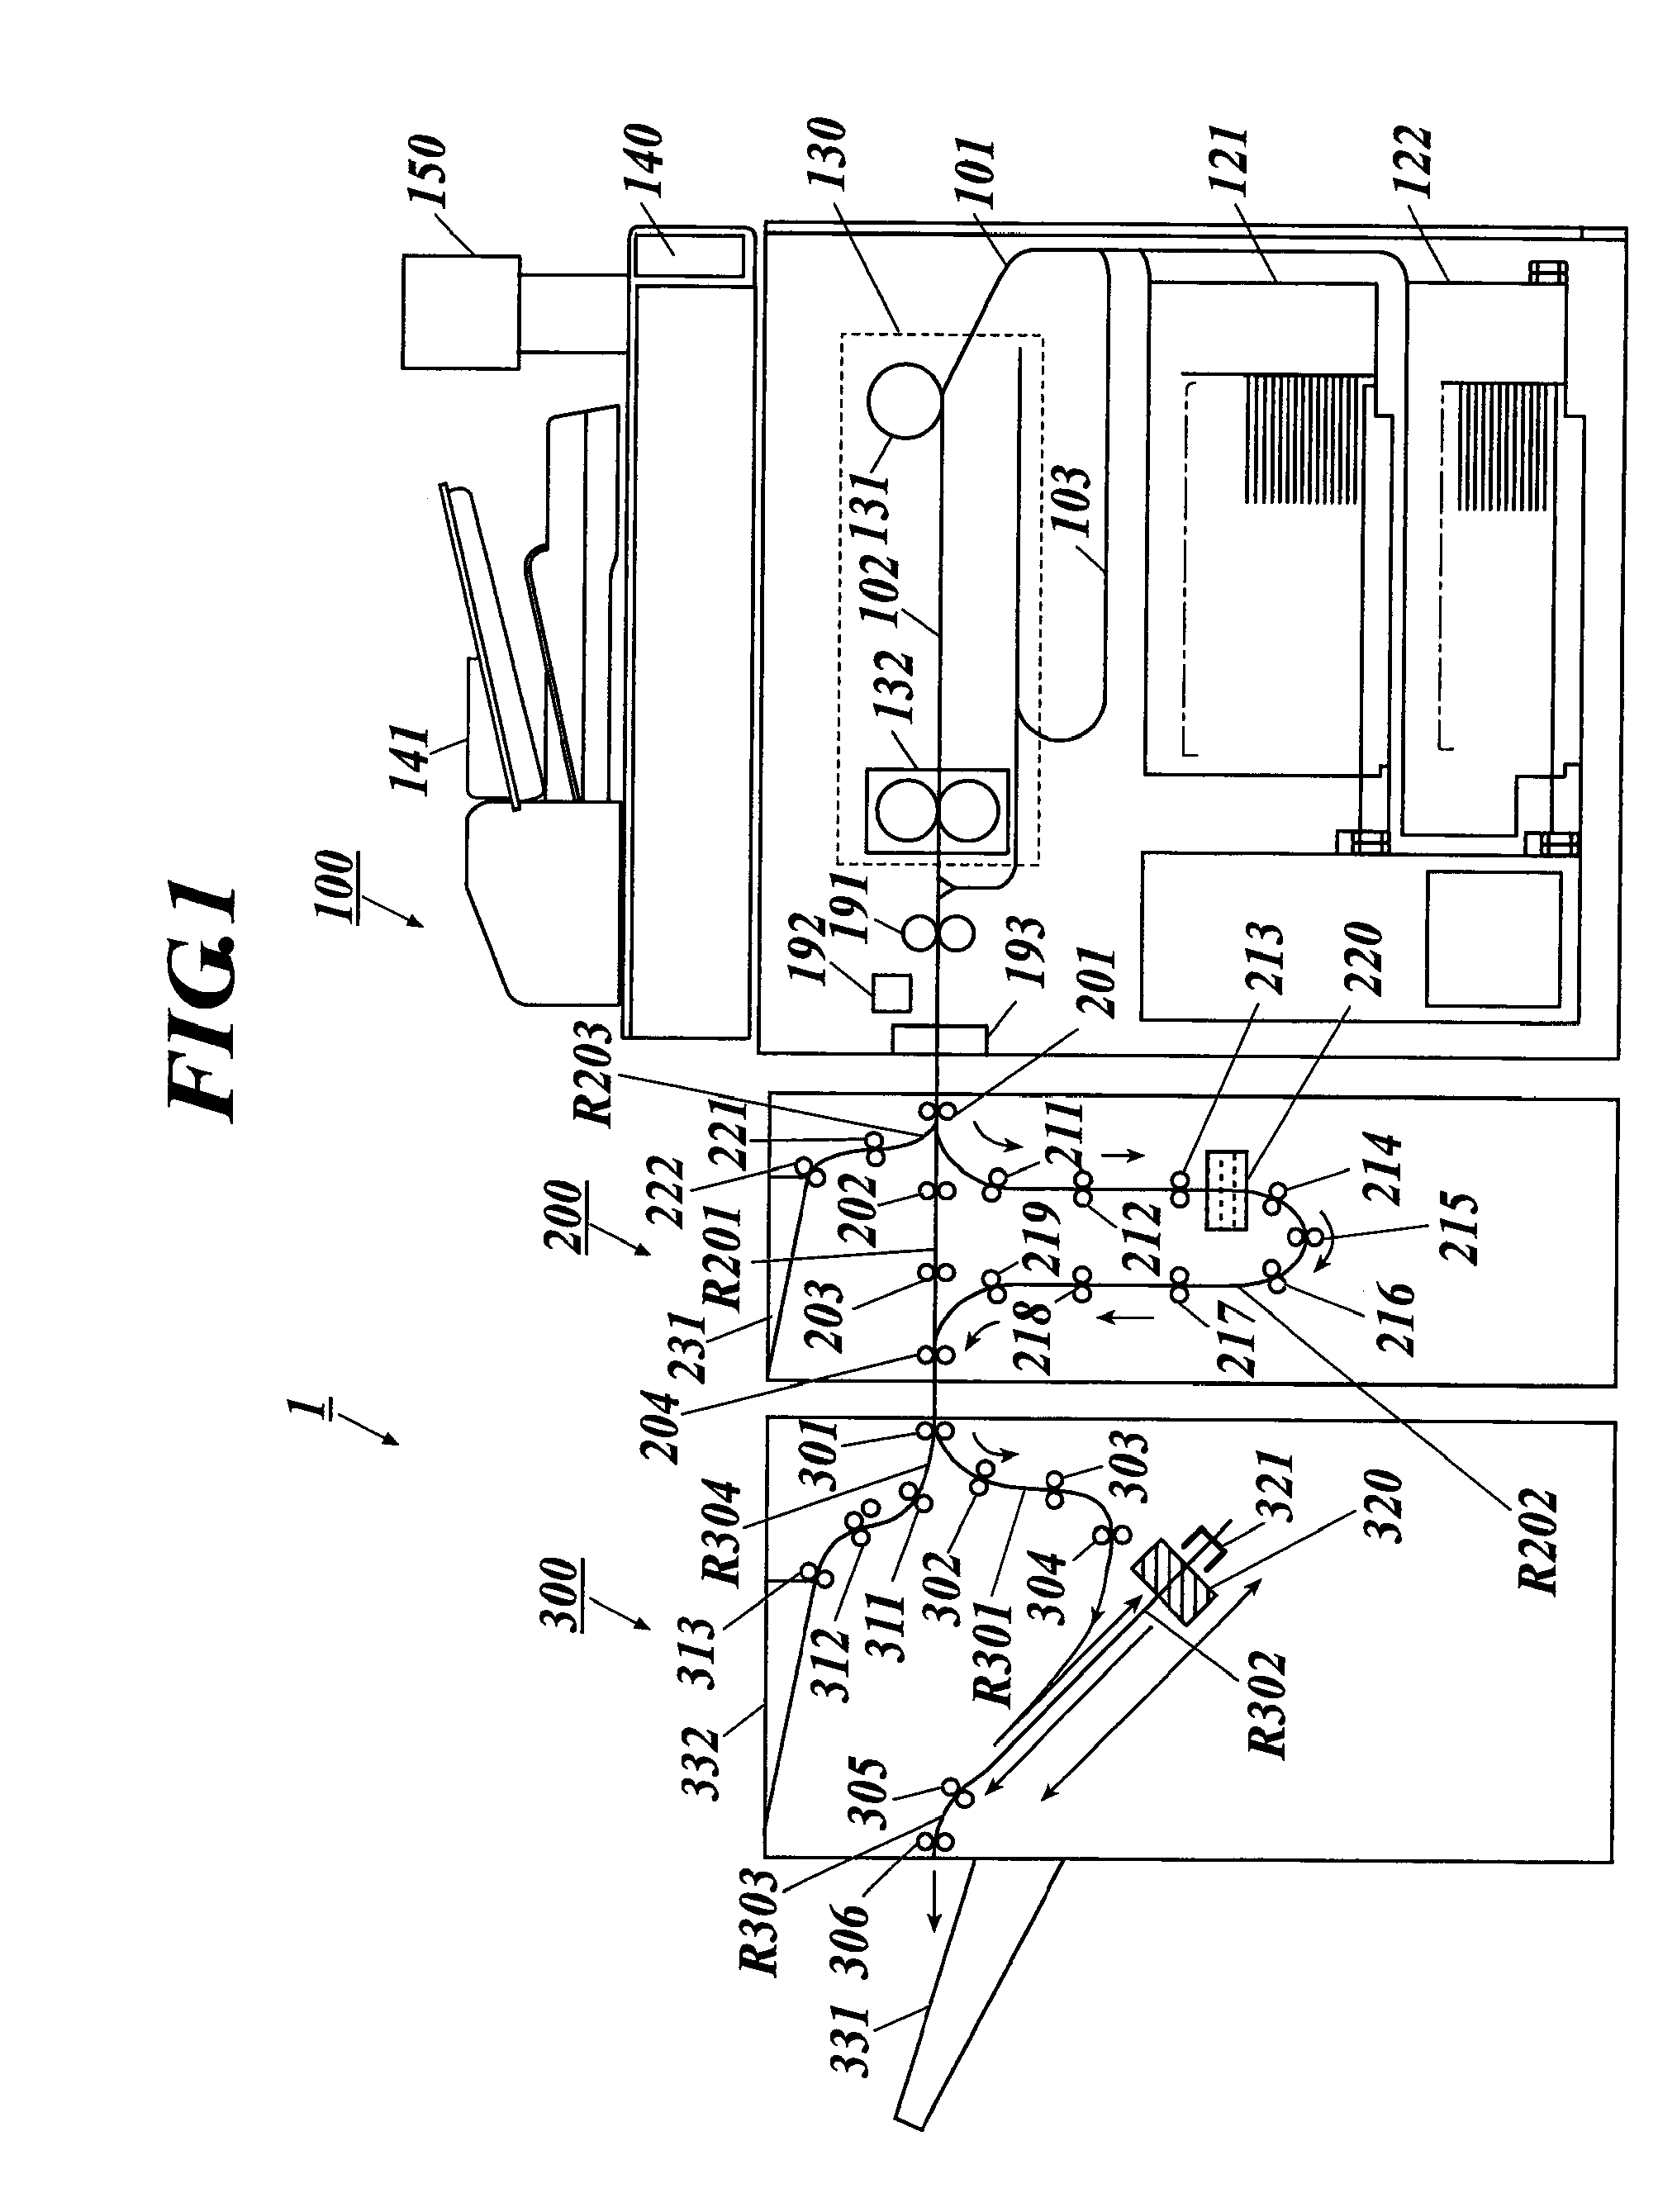 Image forming system and image forming apparatus